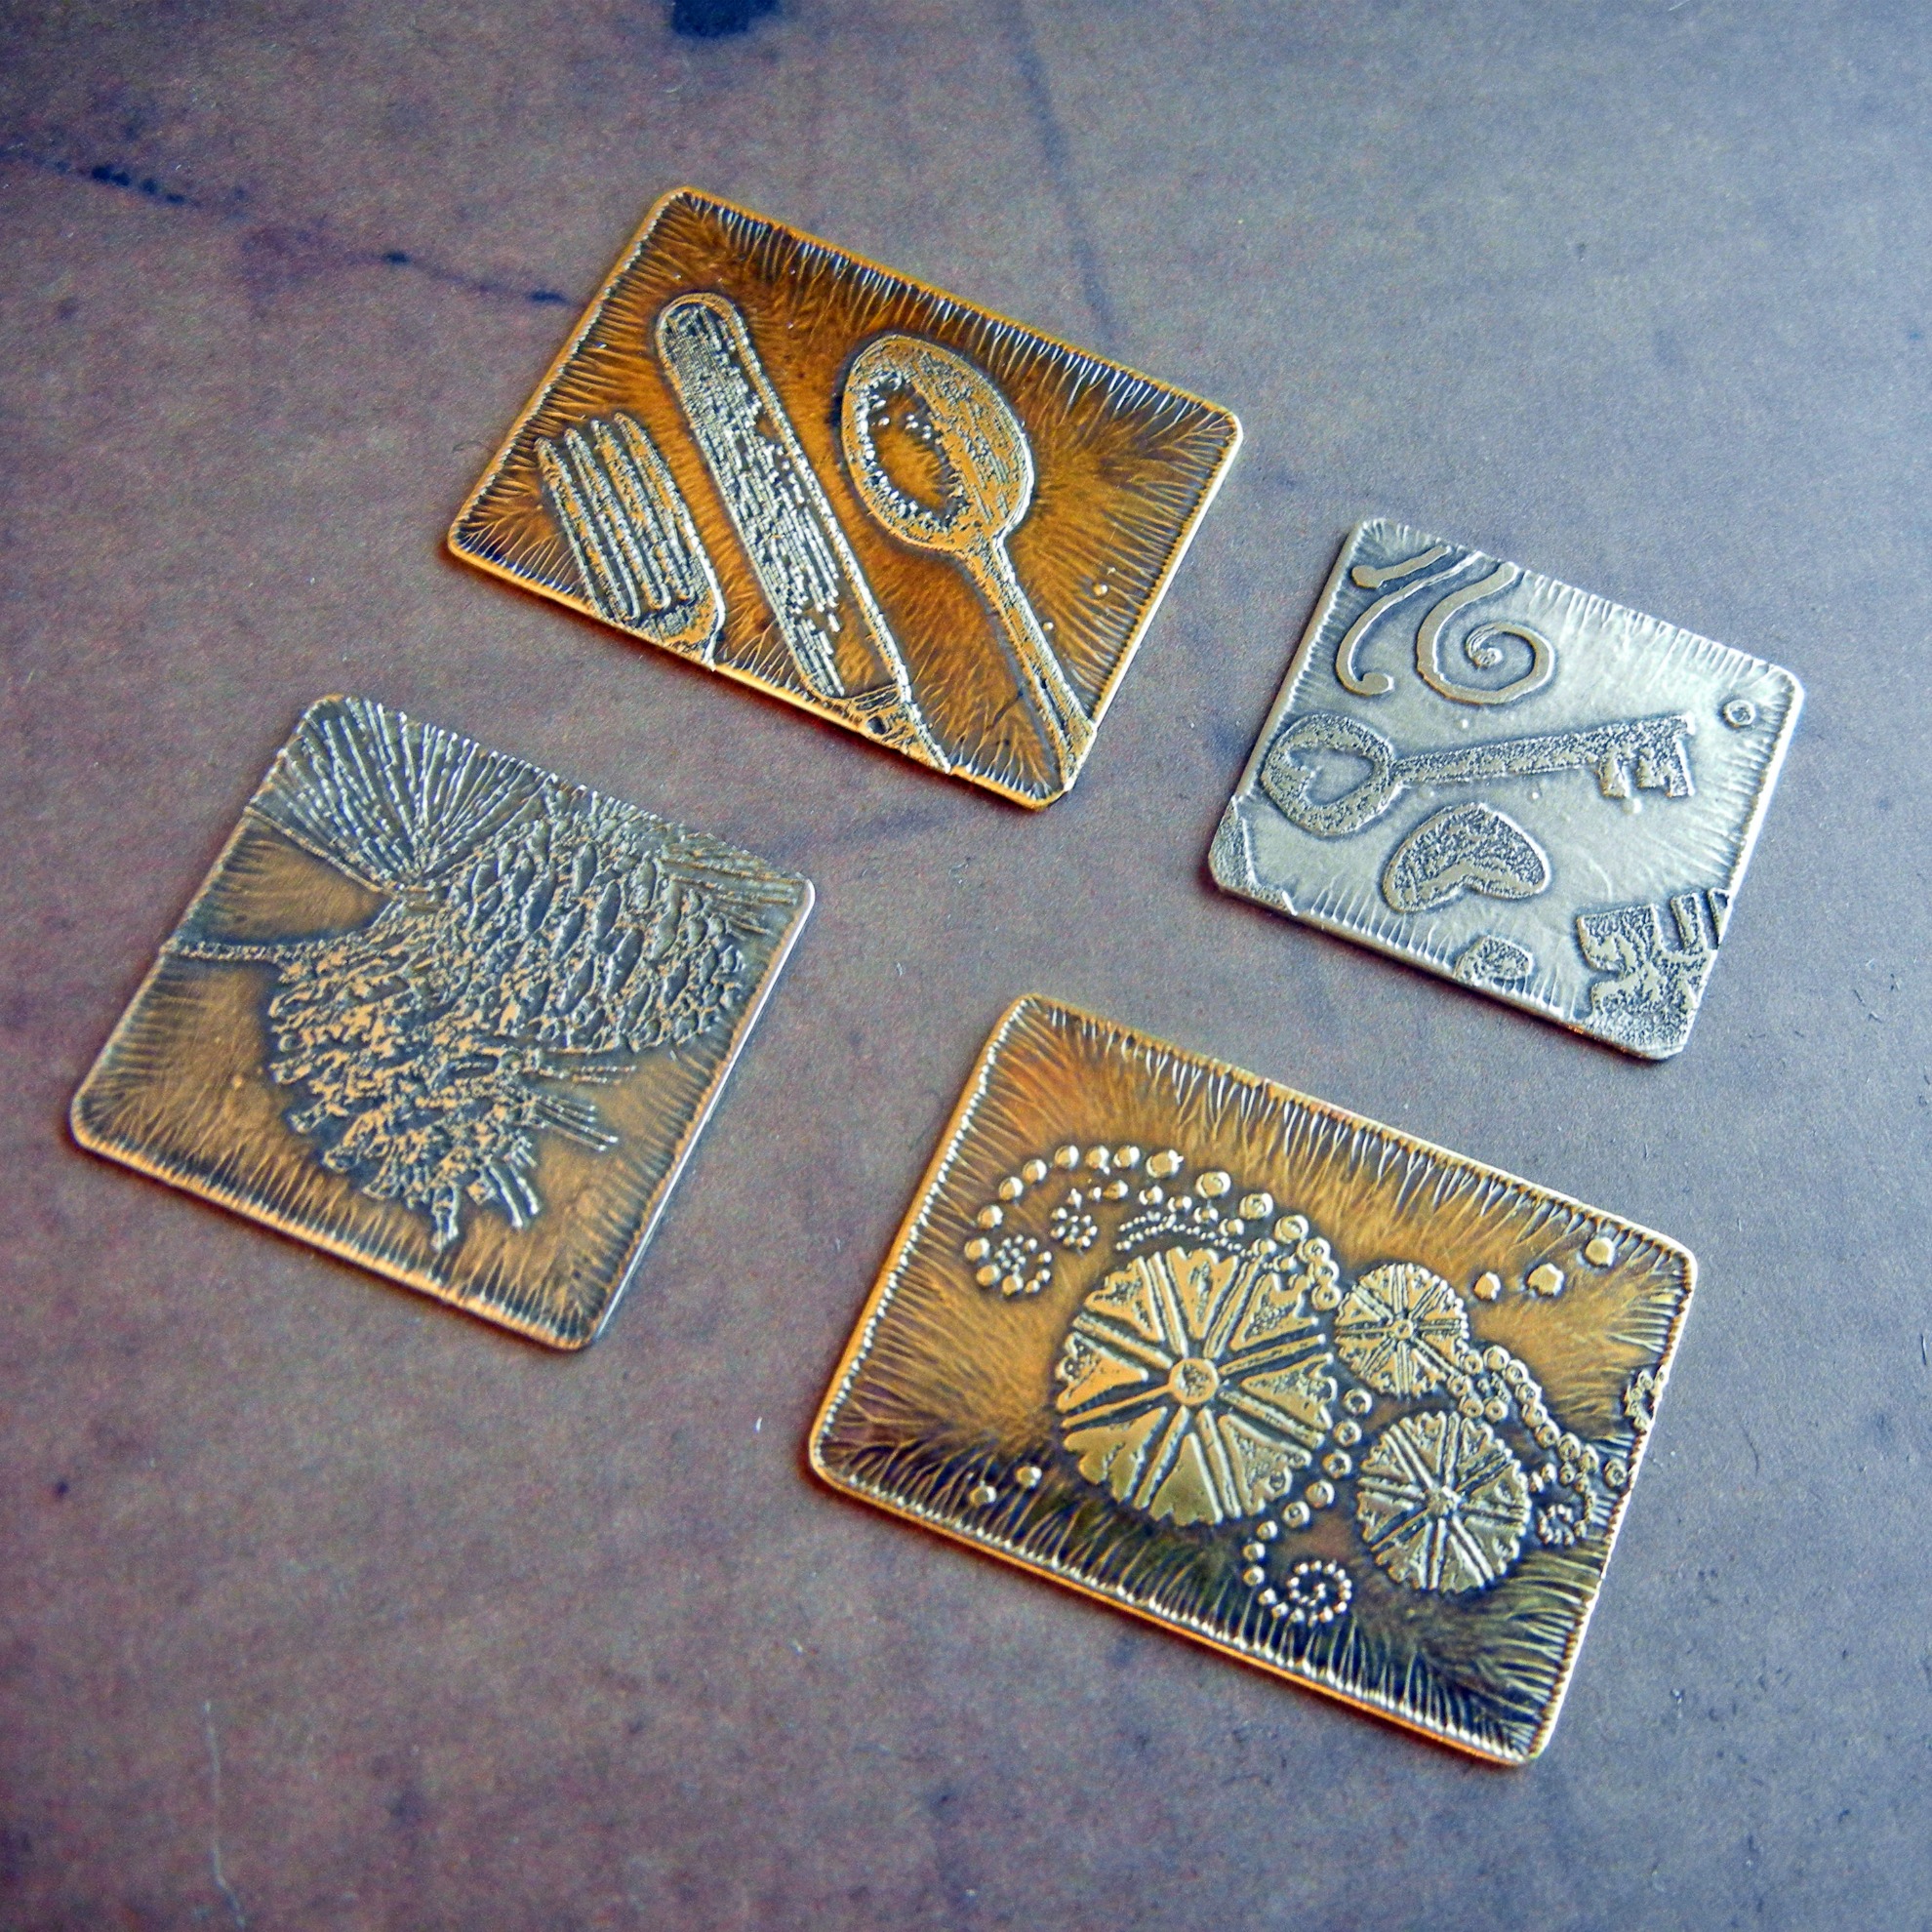 DIY copper etching tutorial - Rings and ThingsRings and Things